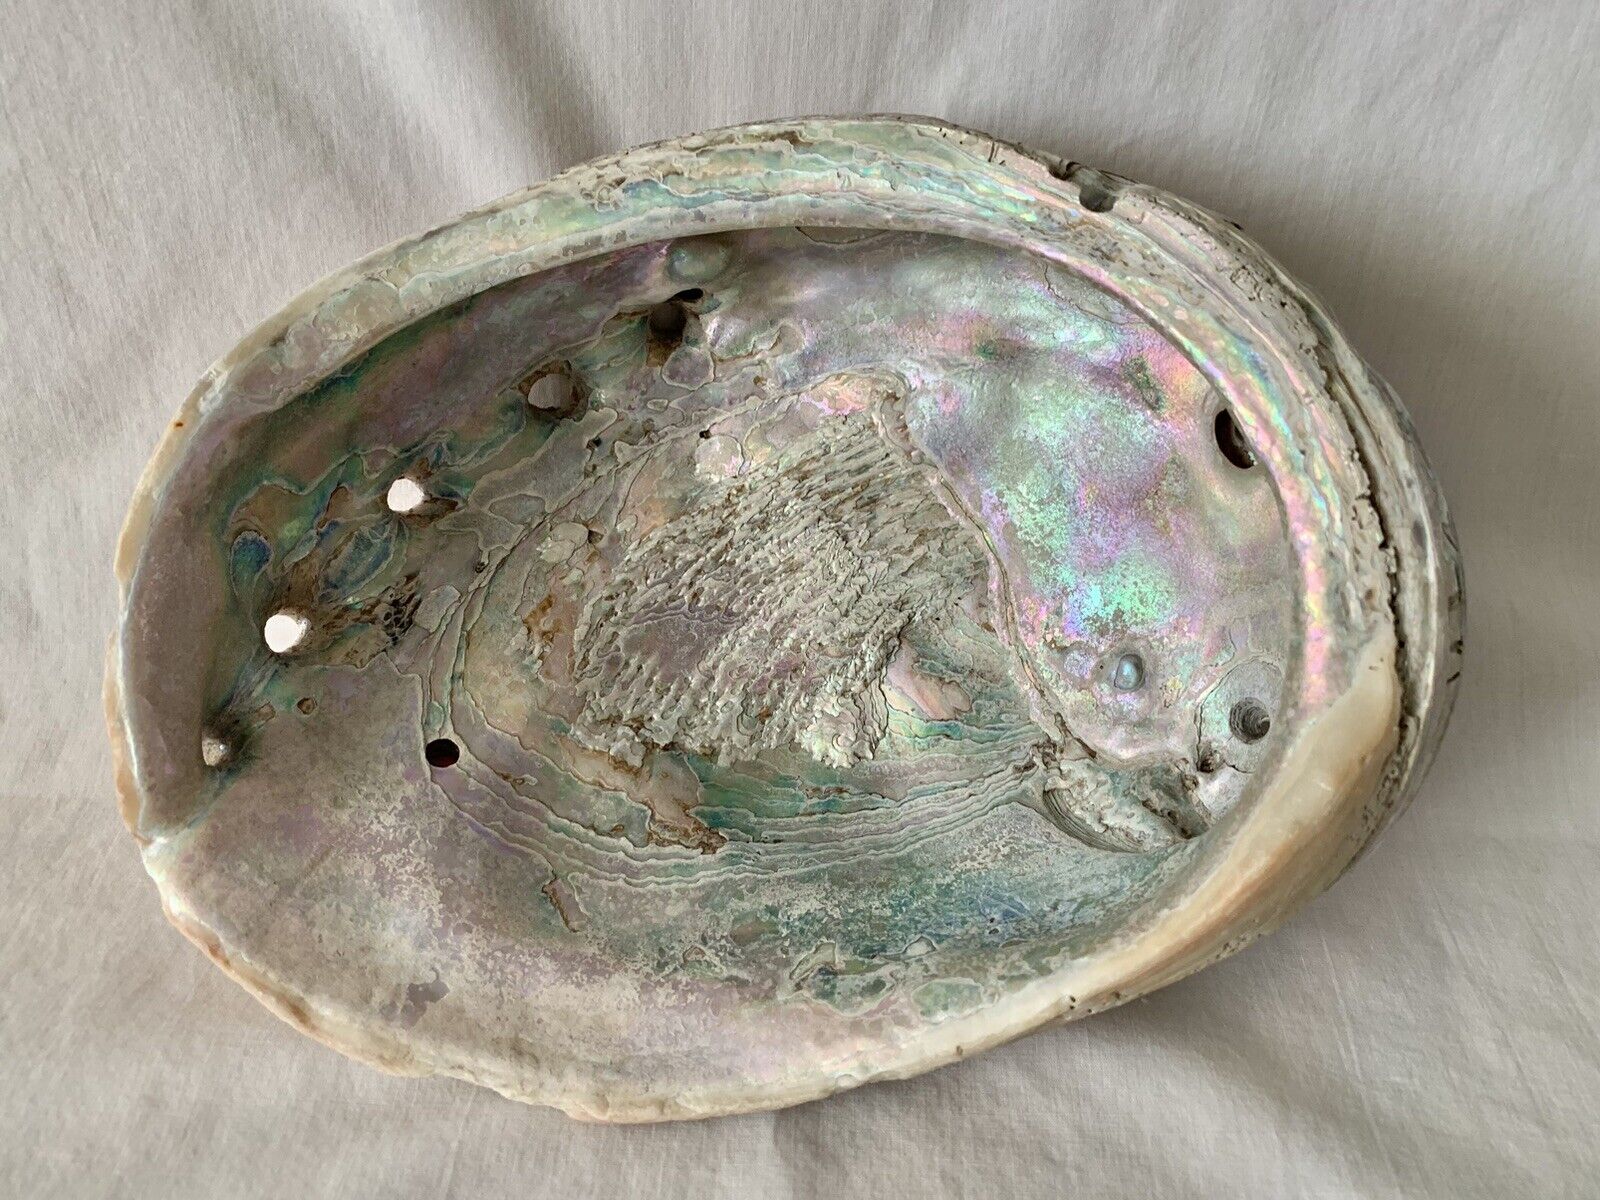 Abalone Shell Natural Iridescent Mother Of Pearl California Ocean 2lb Dish 8x6.5